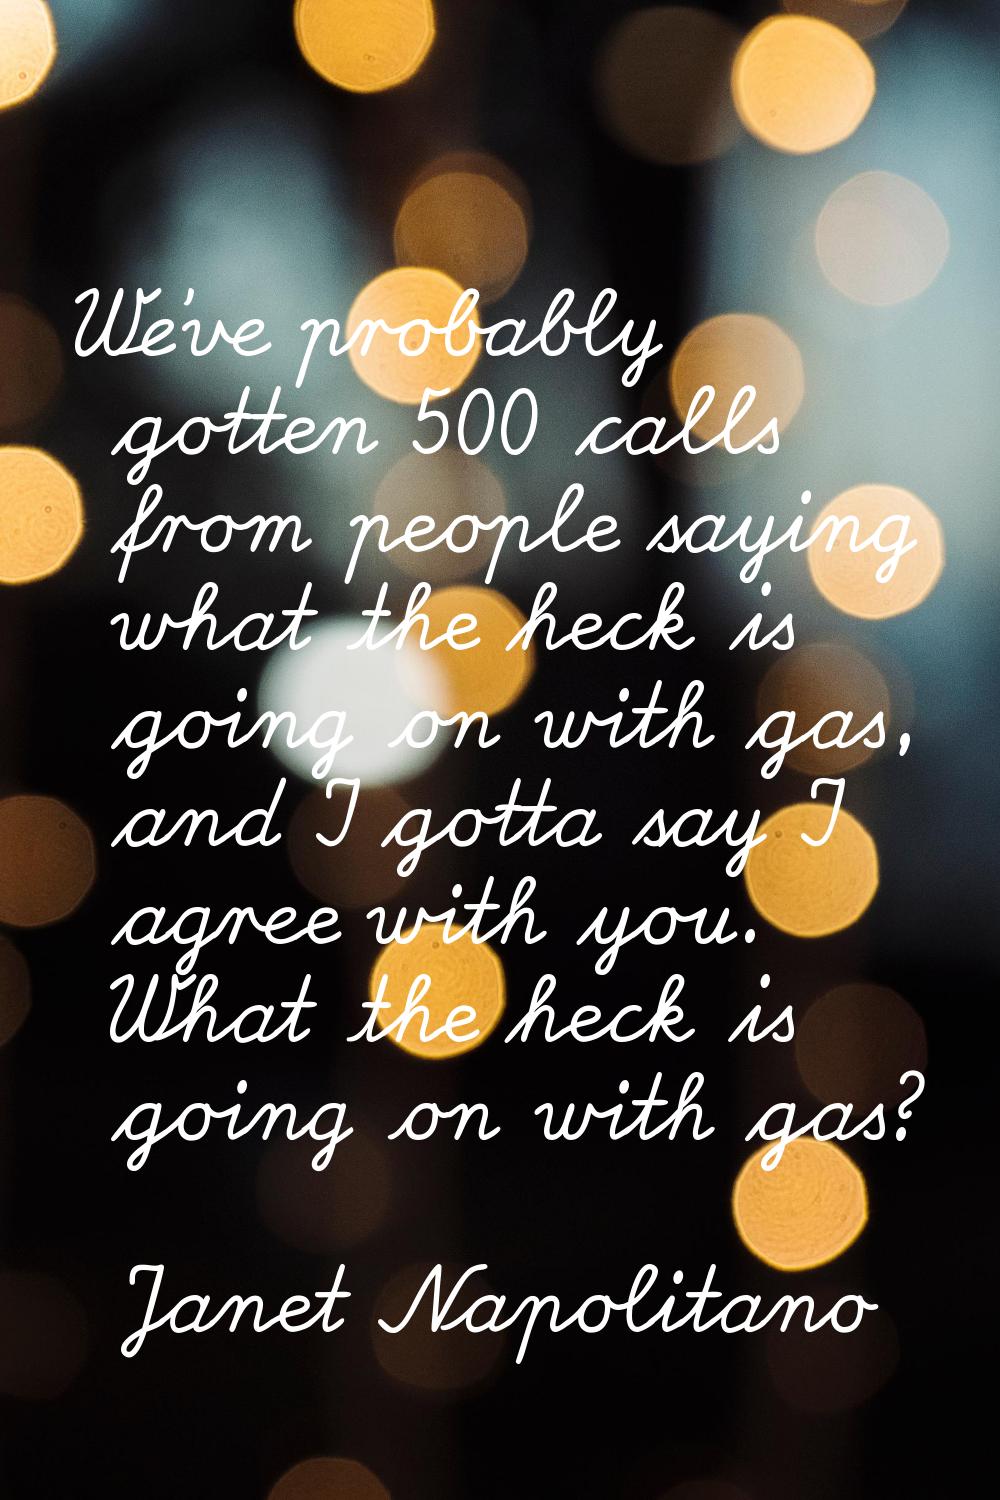 We've probably gotten 500 calls from people saying what the heck is going on with gas, and I gotta 